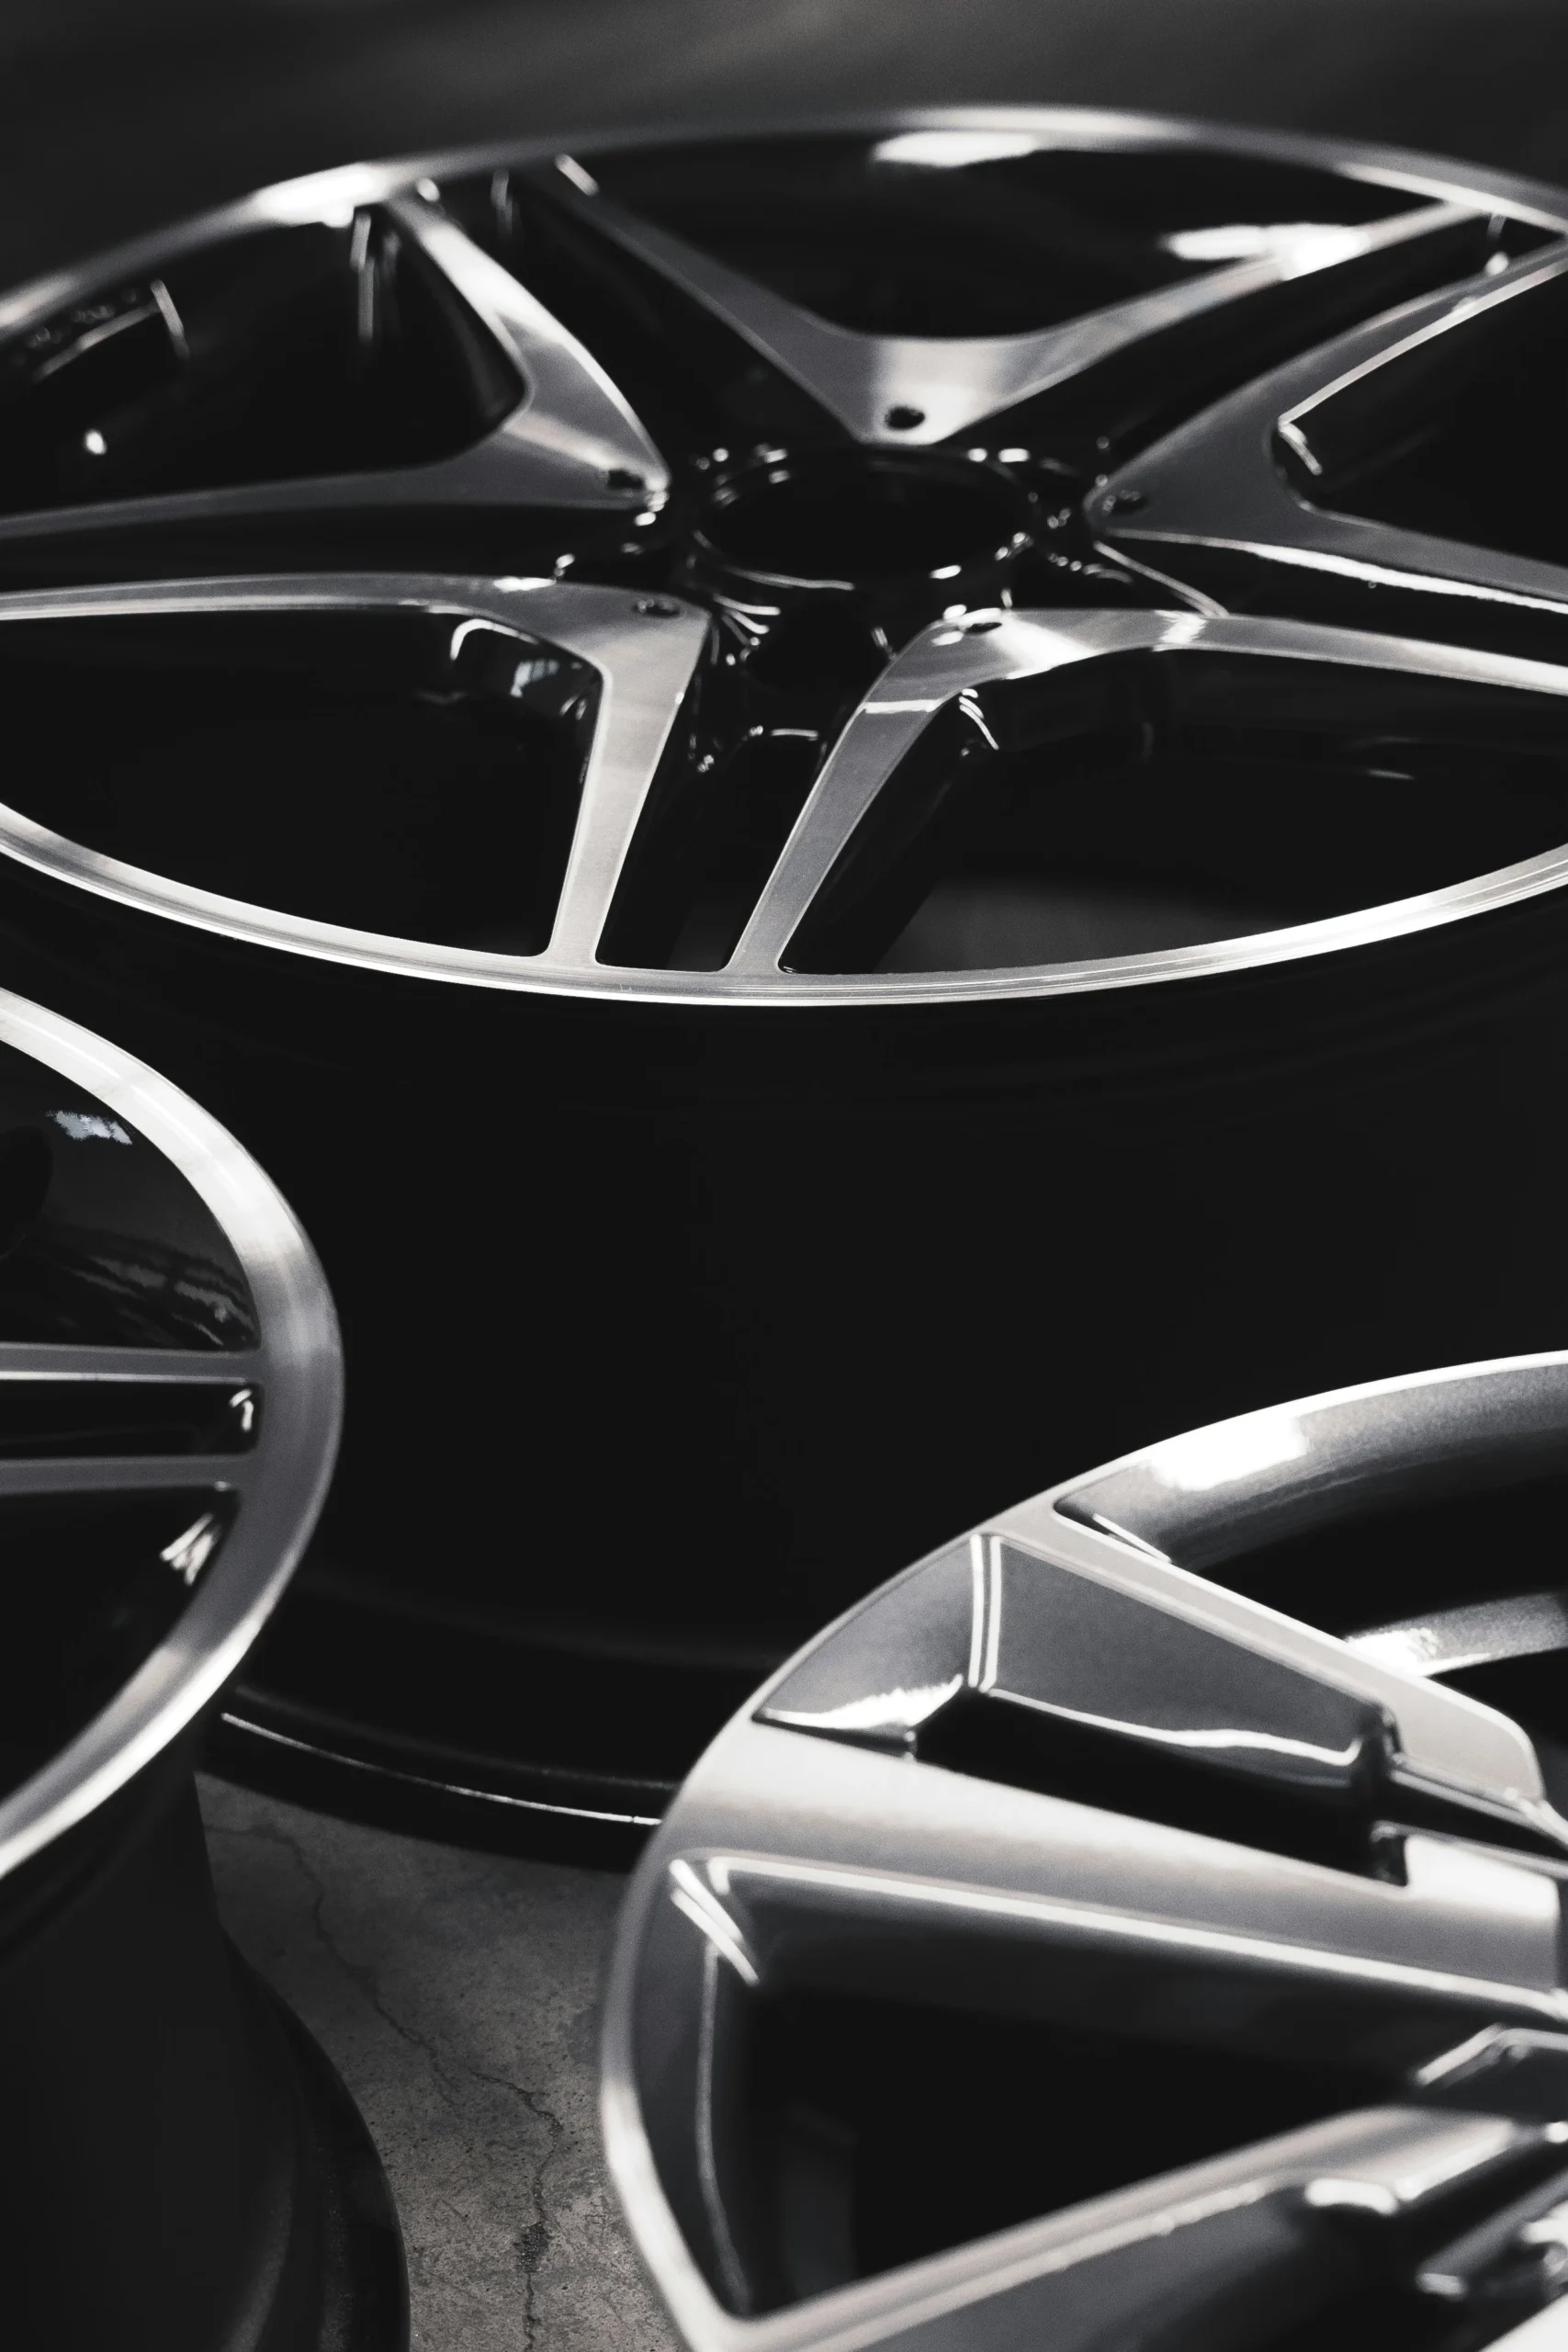 A wide selection of alloy wheels on display at Alpha Tyres and Wheels Title: Enhance Your Ride with Stylish Wheels